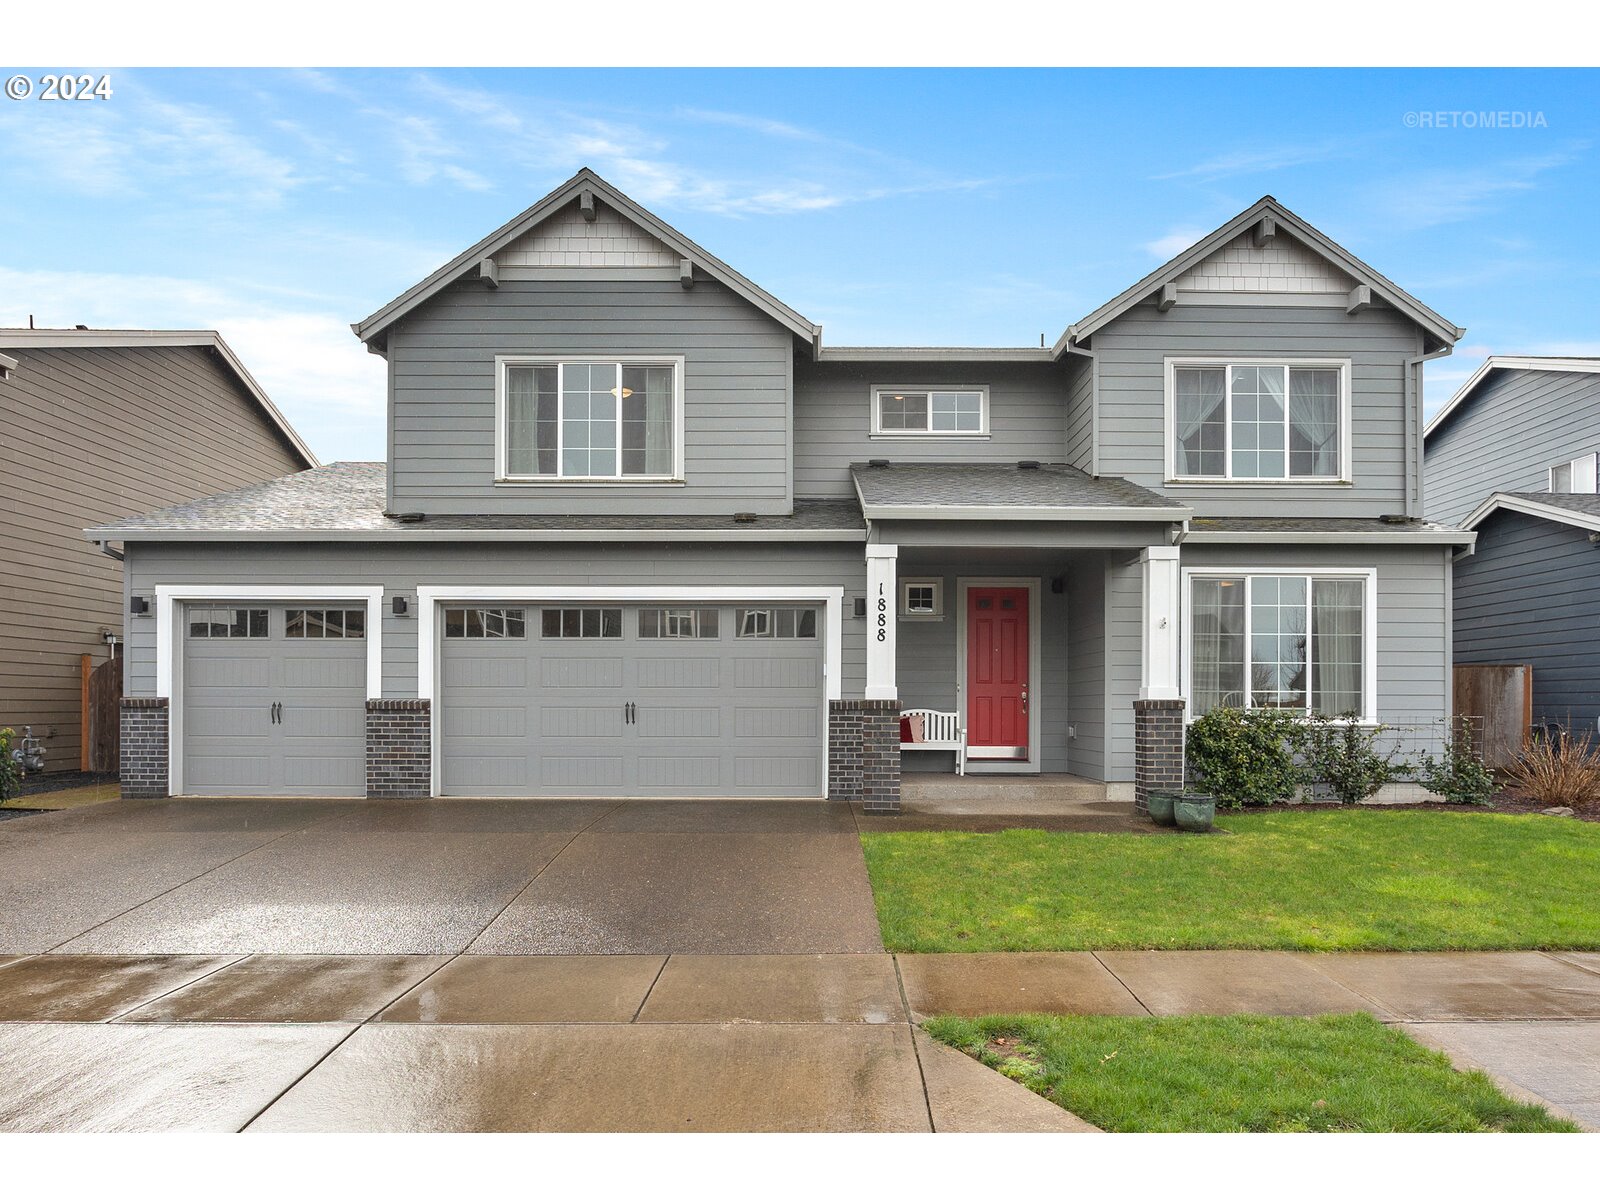 1888 SILVERSTONE DR, Forest Grove, OR 